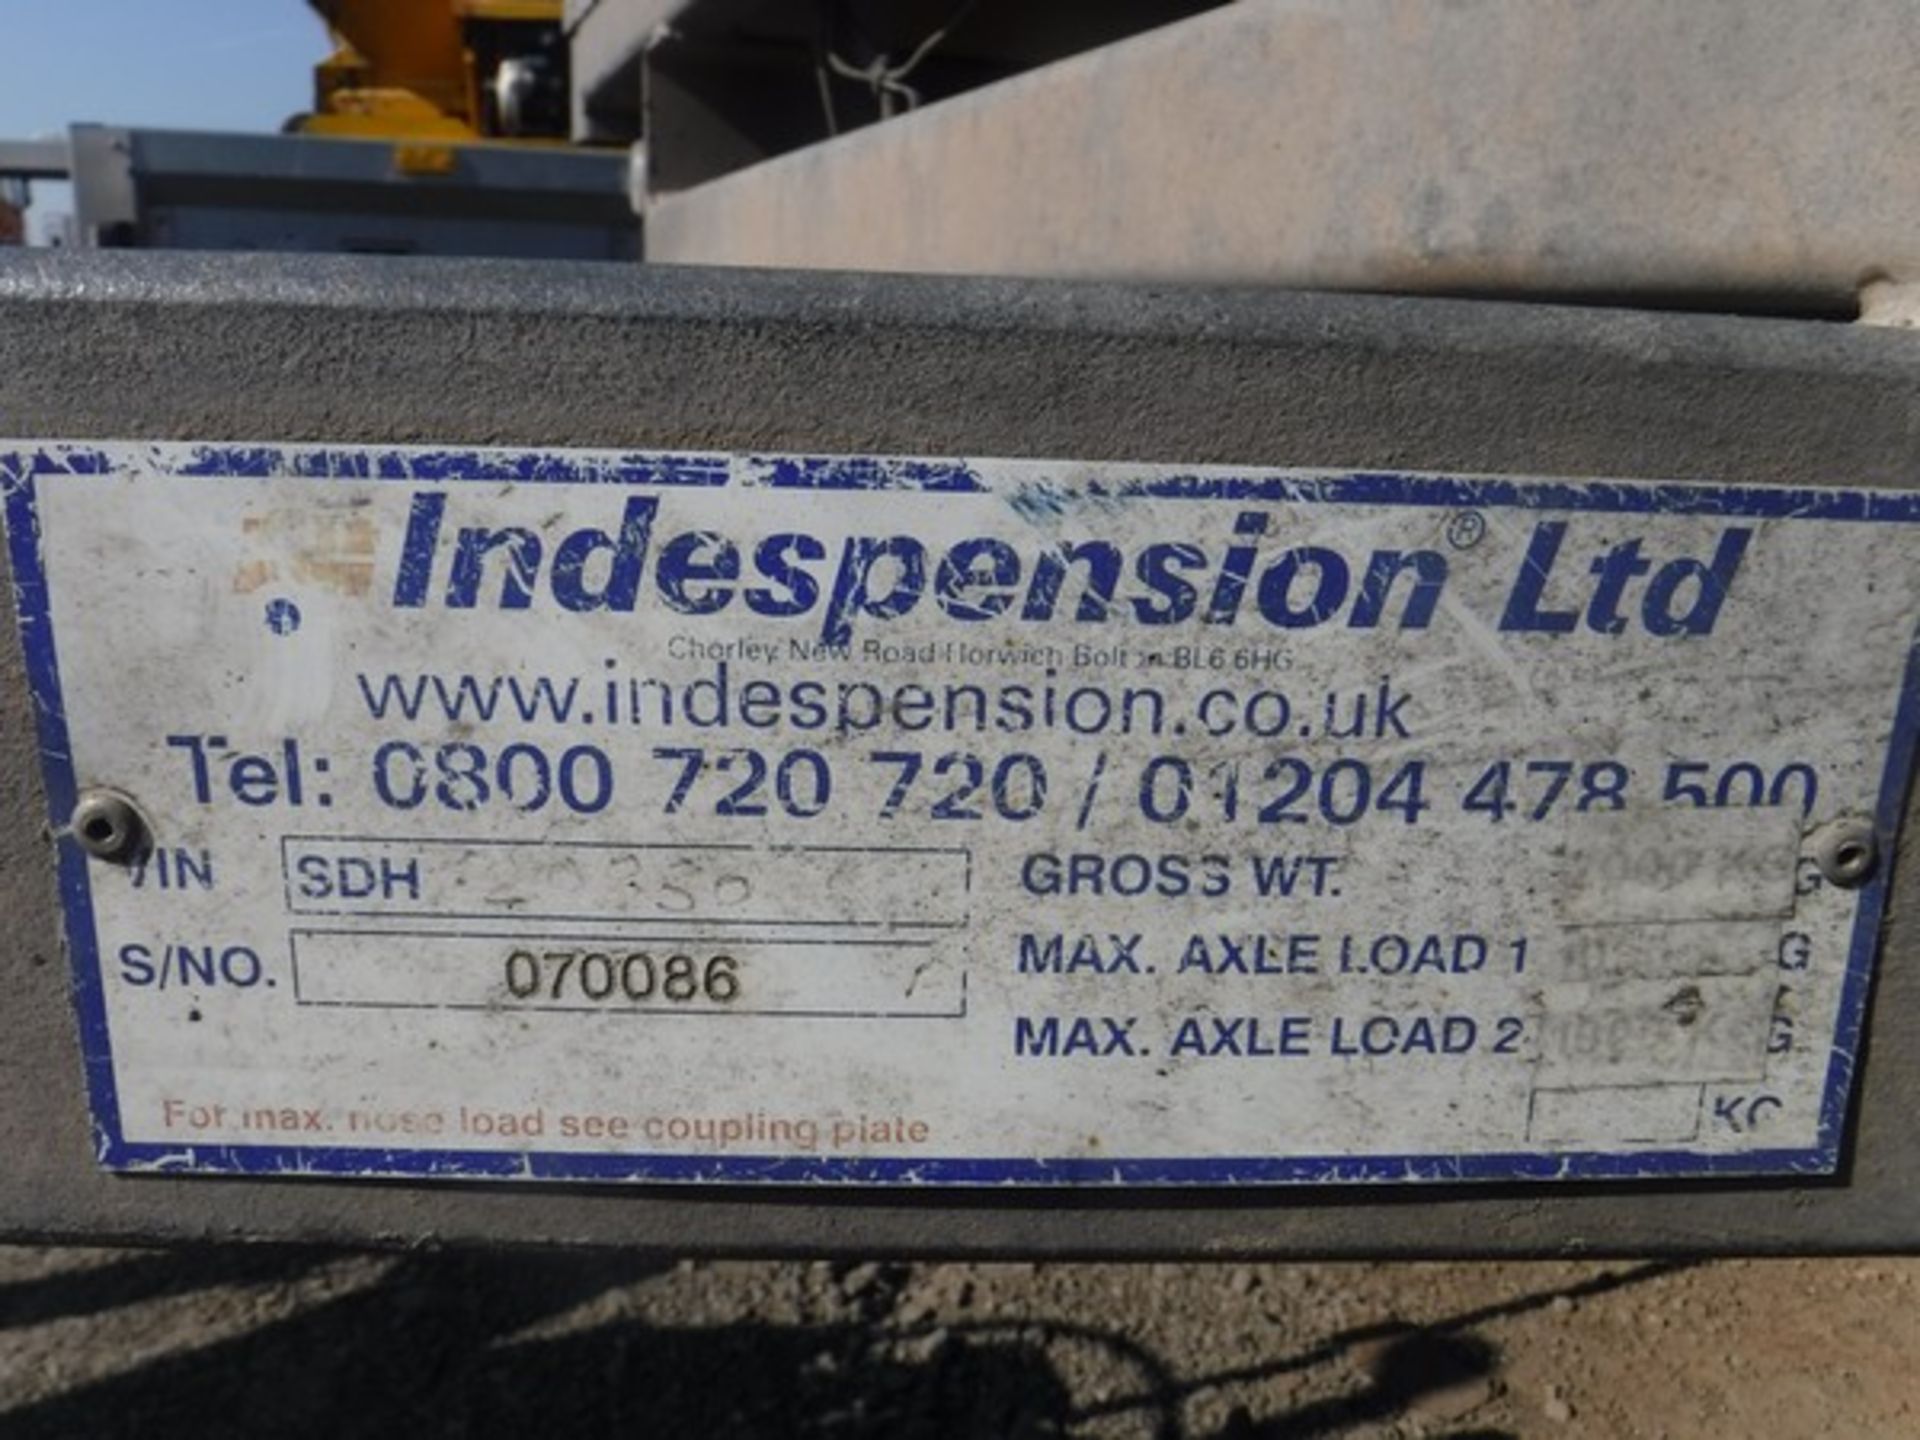 INDESPENSION trailer. S/N 070086. Twin axle 8ft x 5ft, drop tailgate with cover. Asset no 758-4029. - Image 6 of 6